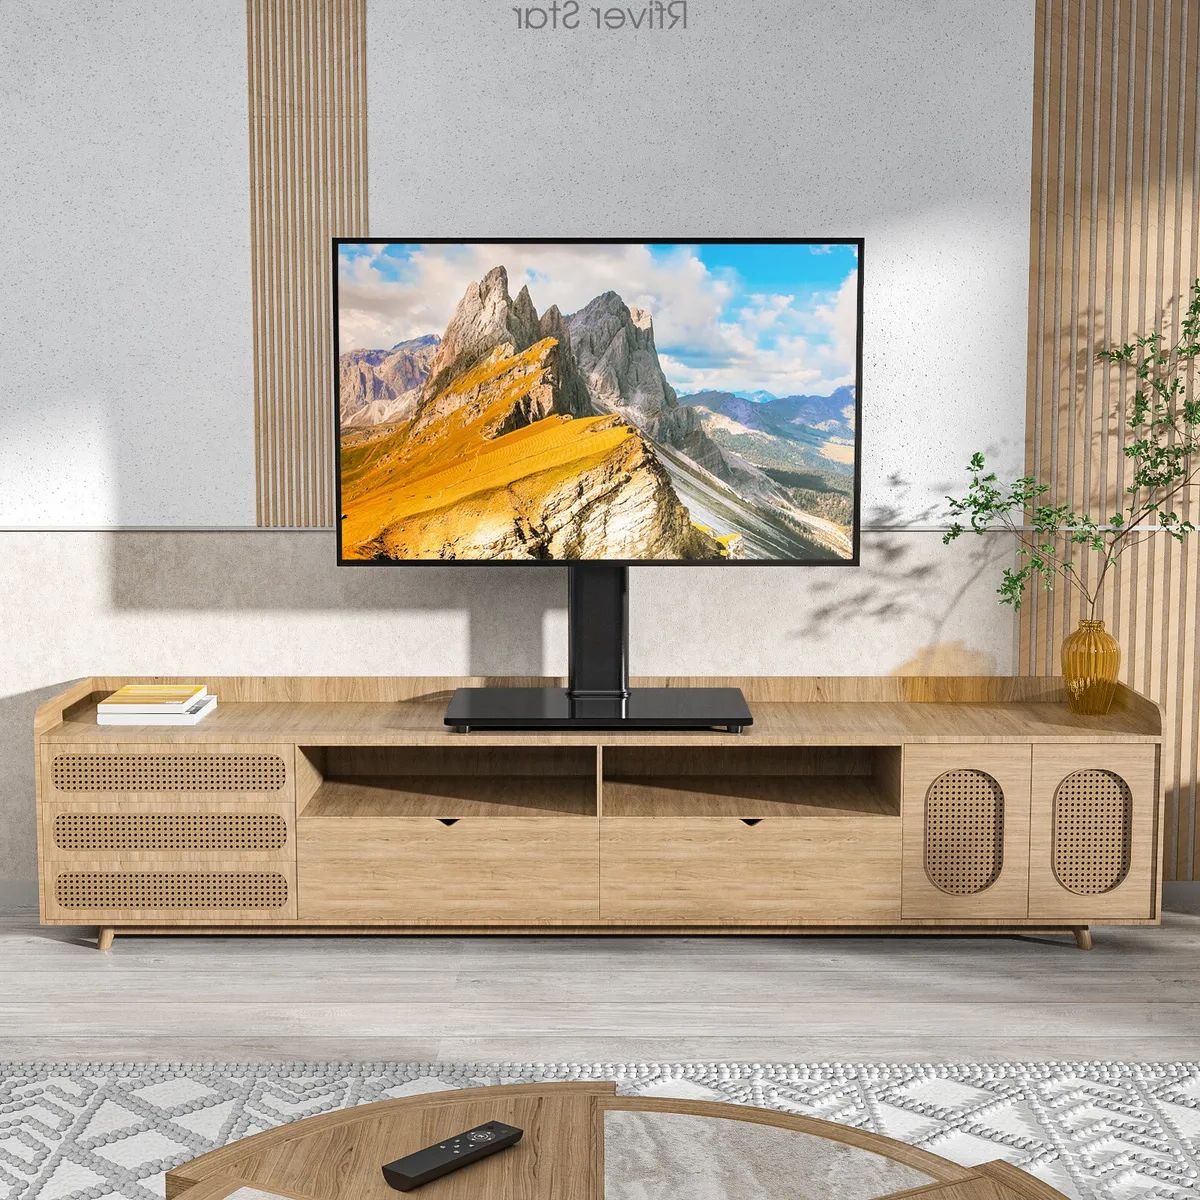 Universal Swivel Tabletop Tv Stand For Flat Screens 23 24 26 32 39 40 43  Inch Tv | Ebay Inside Universal Tabletop Tv Stands (View 4 of 20)